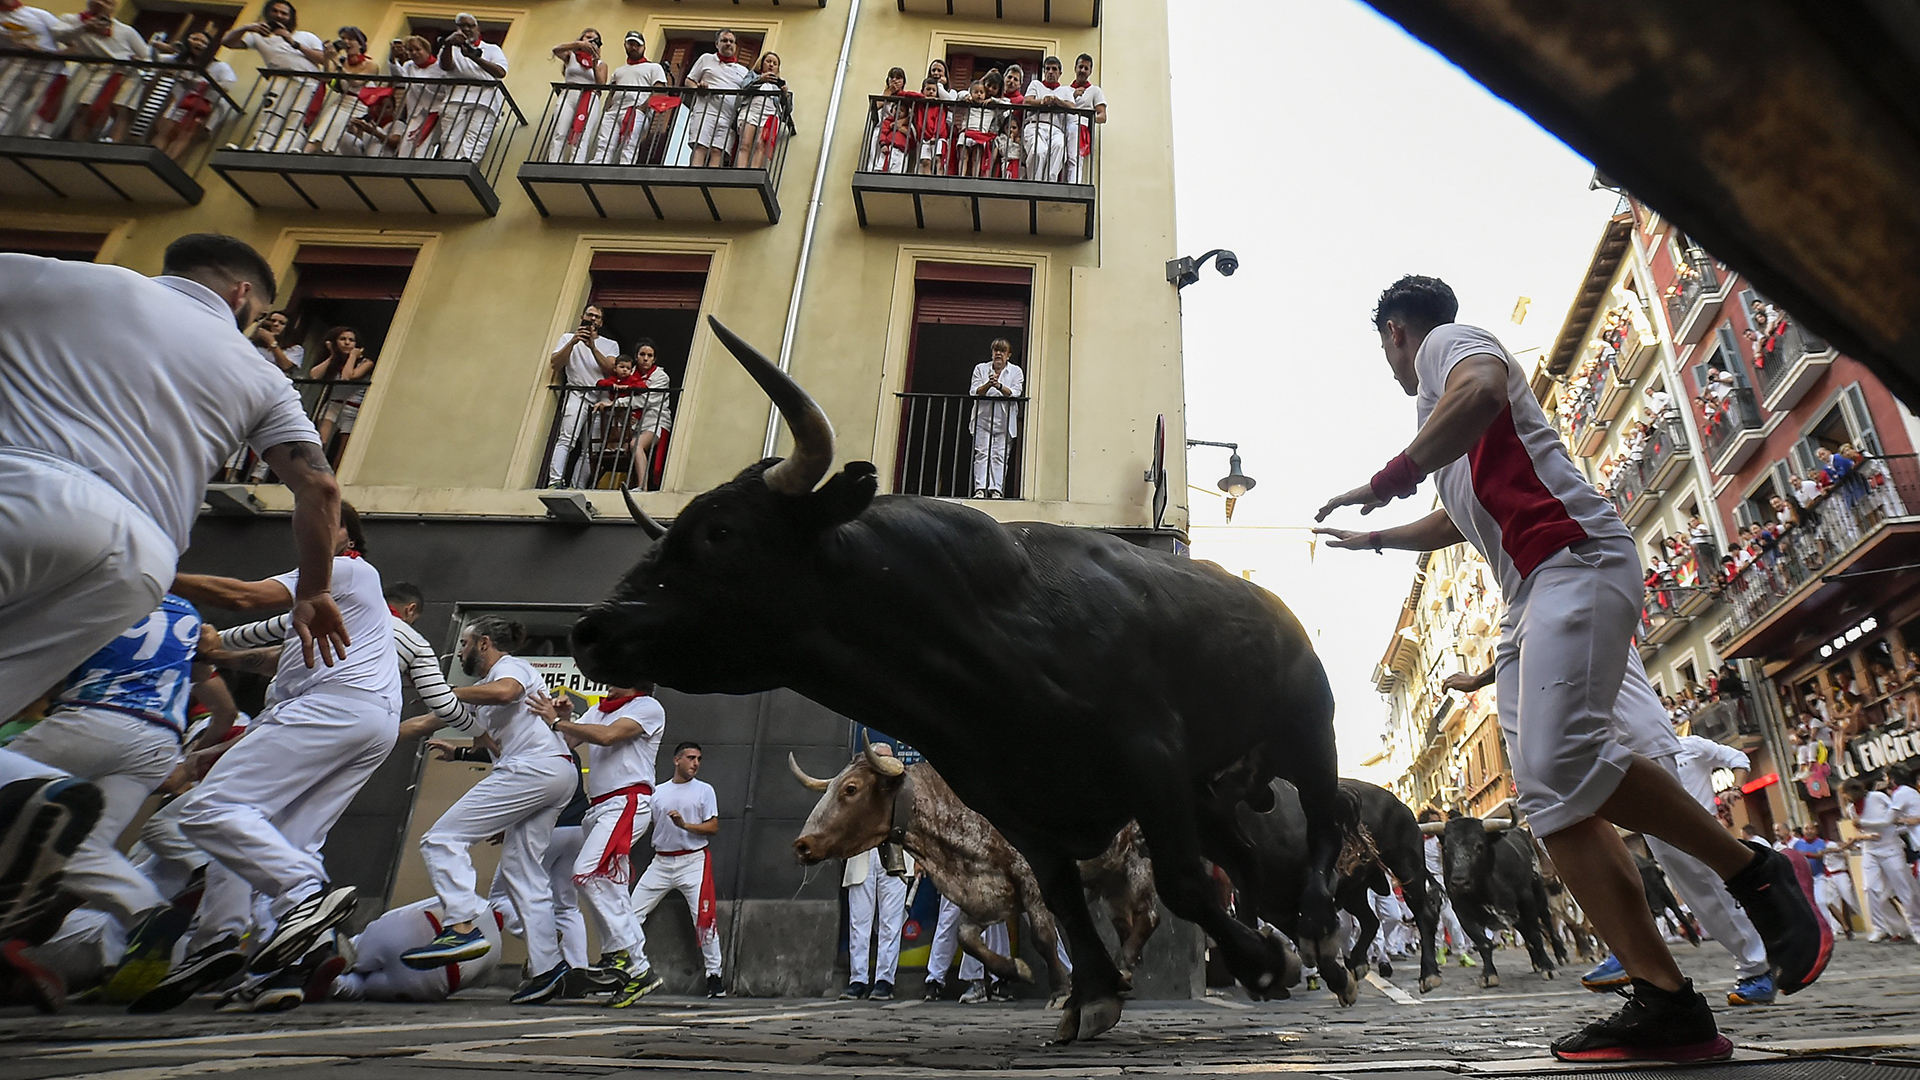 Watch Thousands take part in the running of the bulls in northern Spain